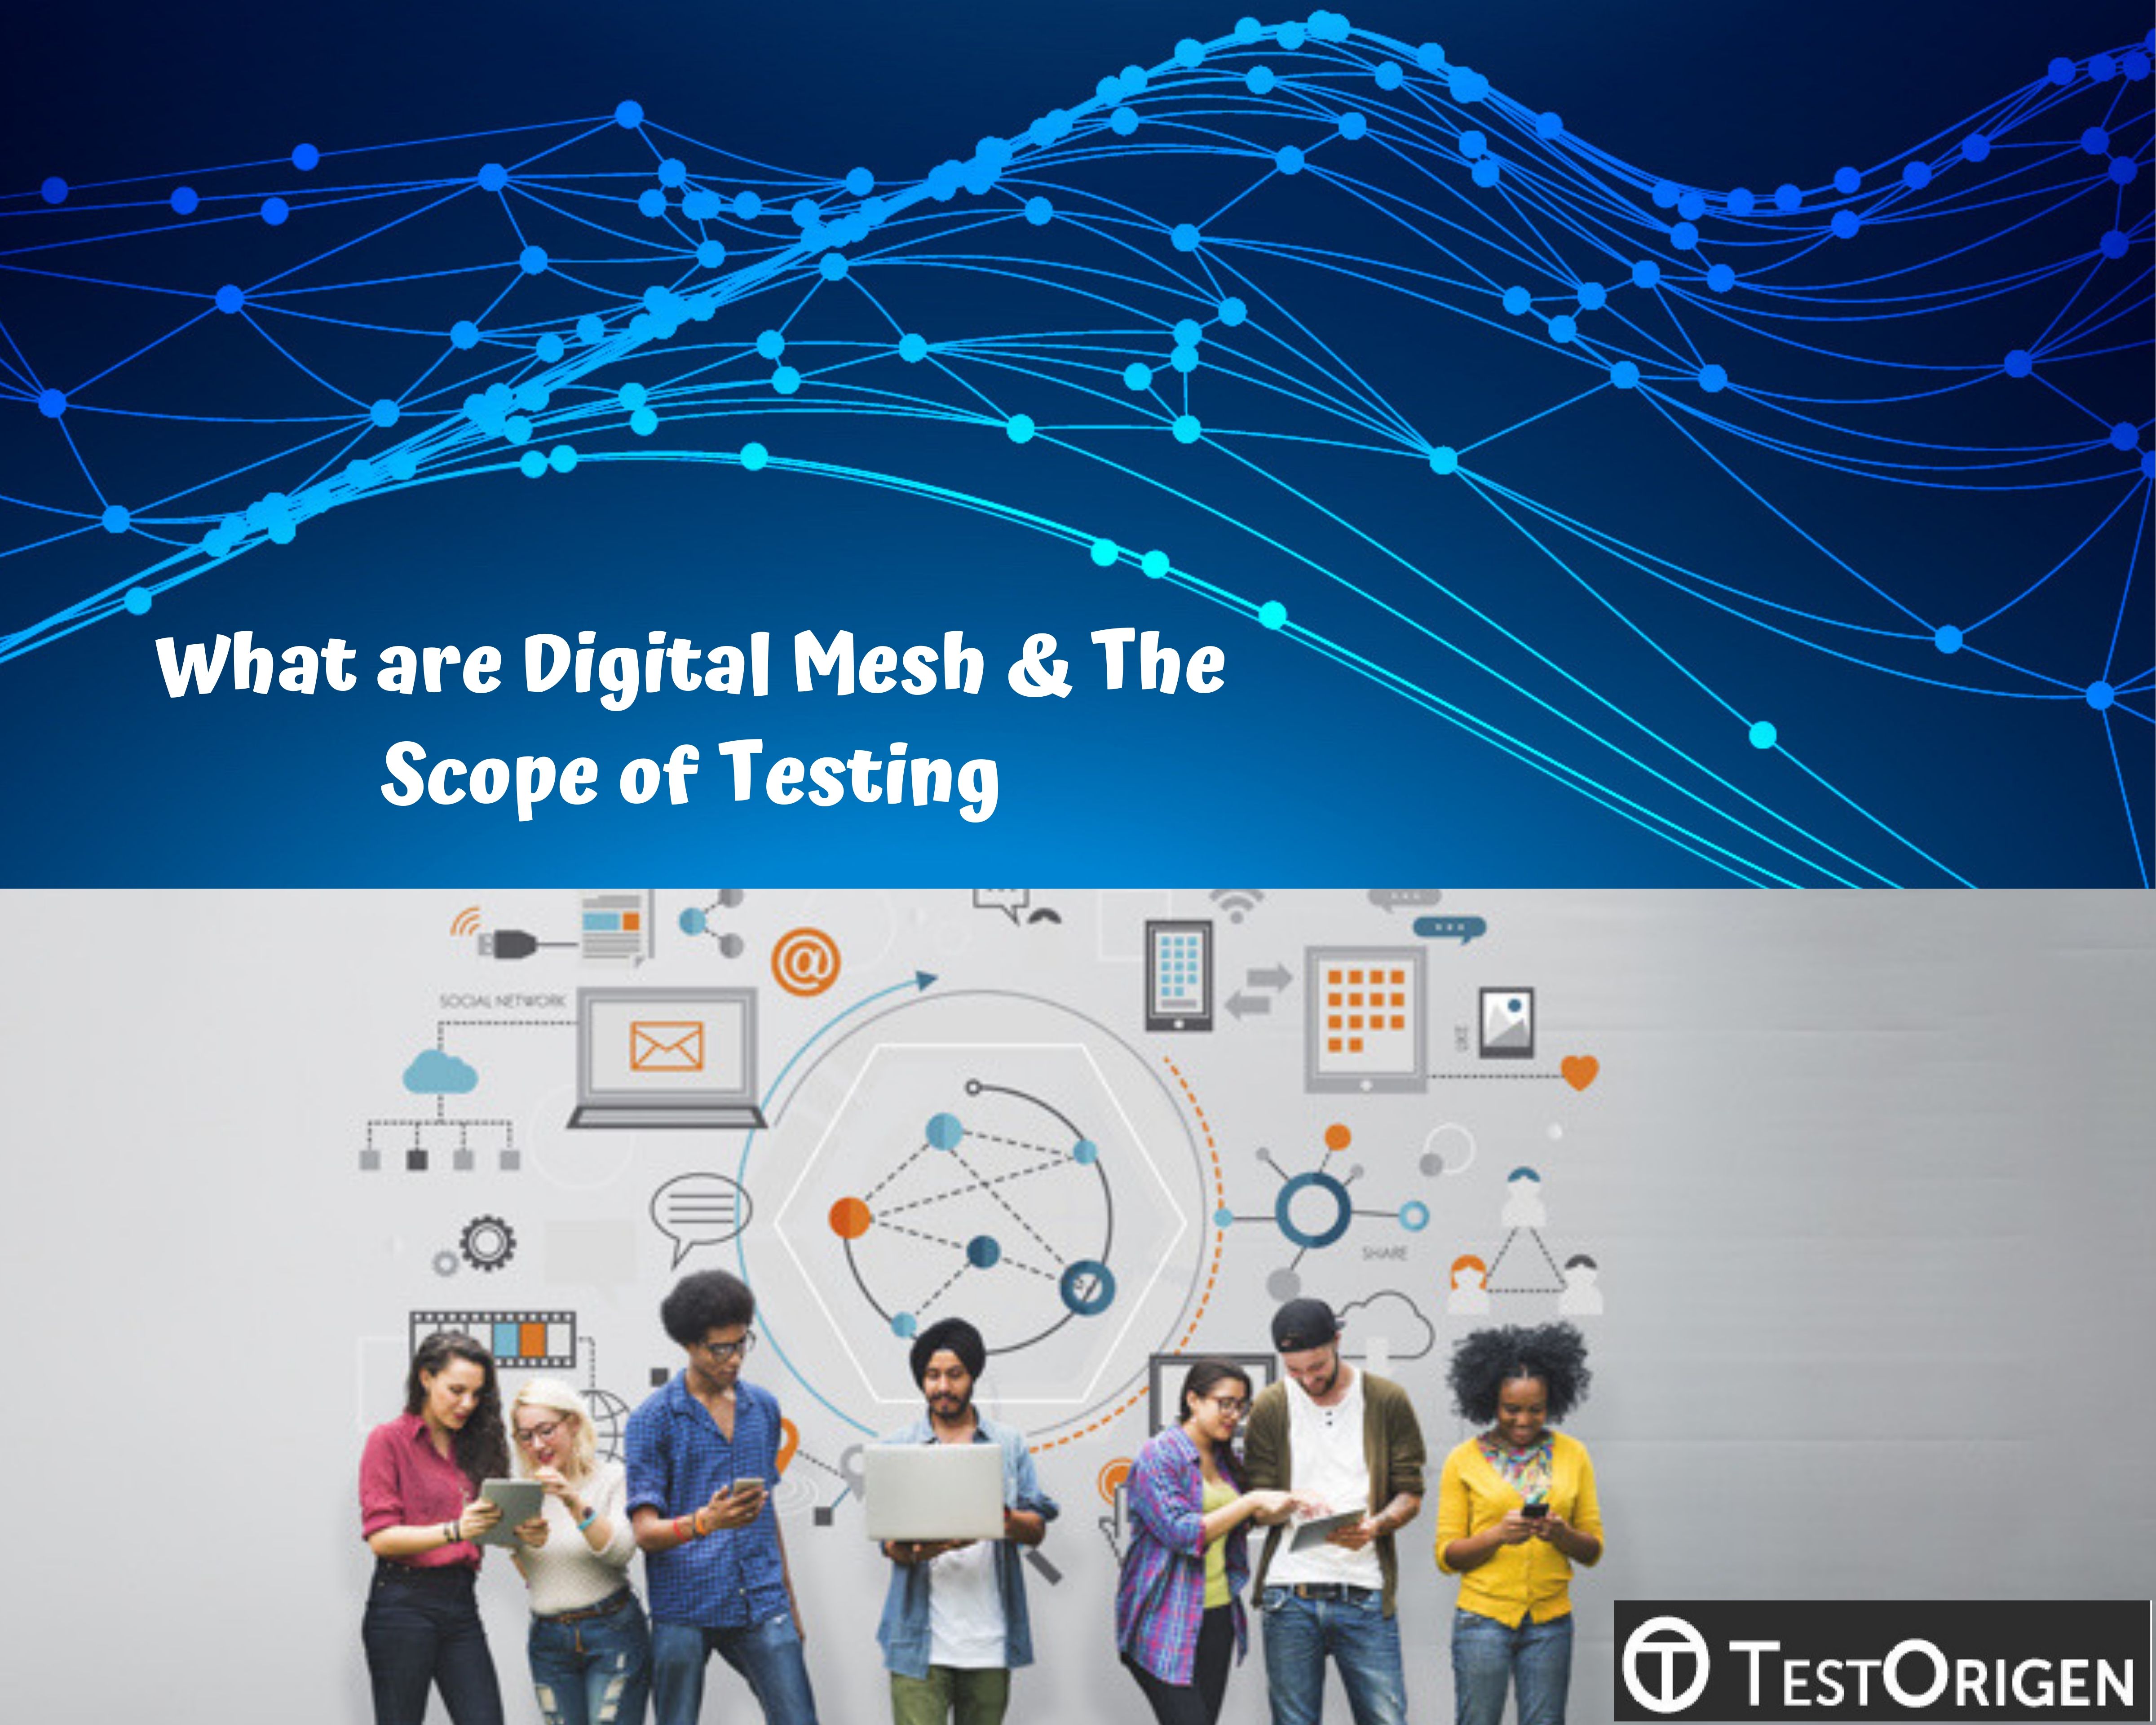 What are Digital Mesh & The Scope of Testing